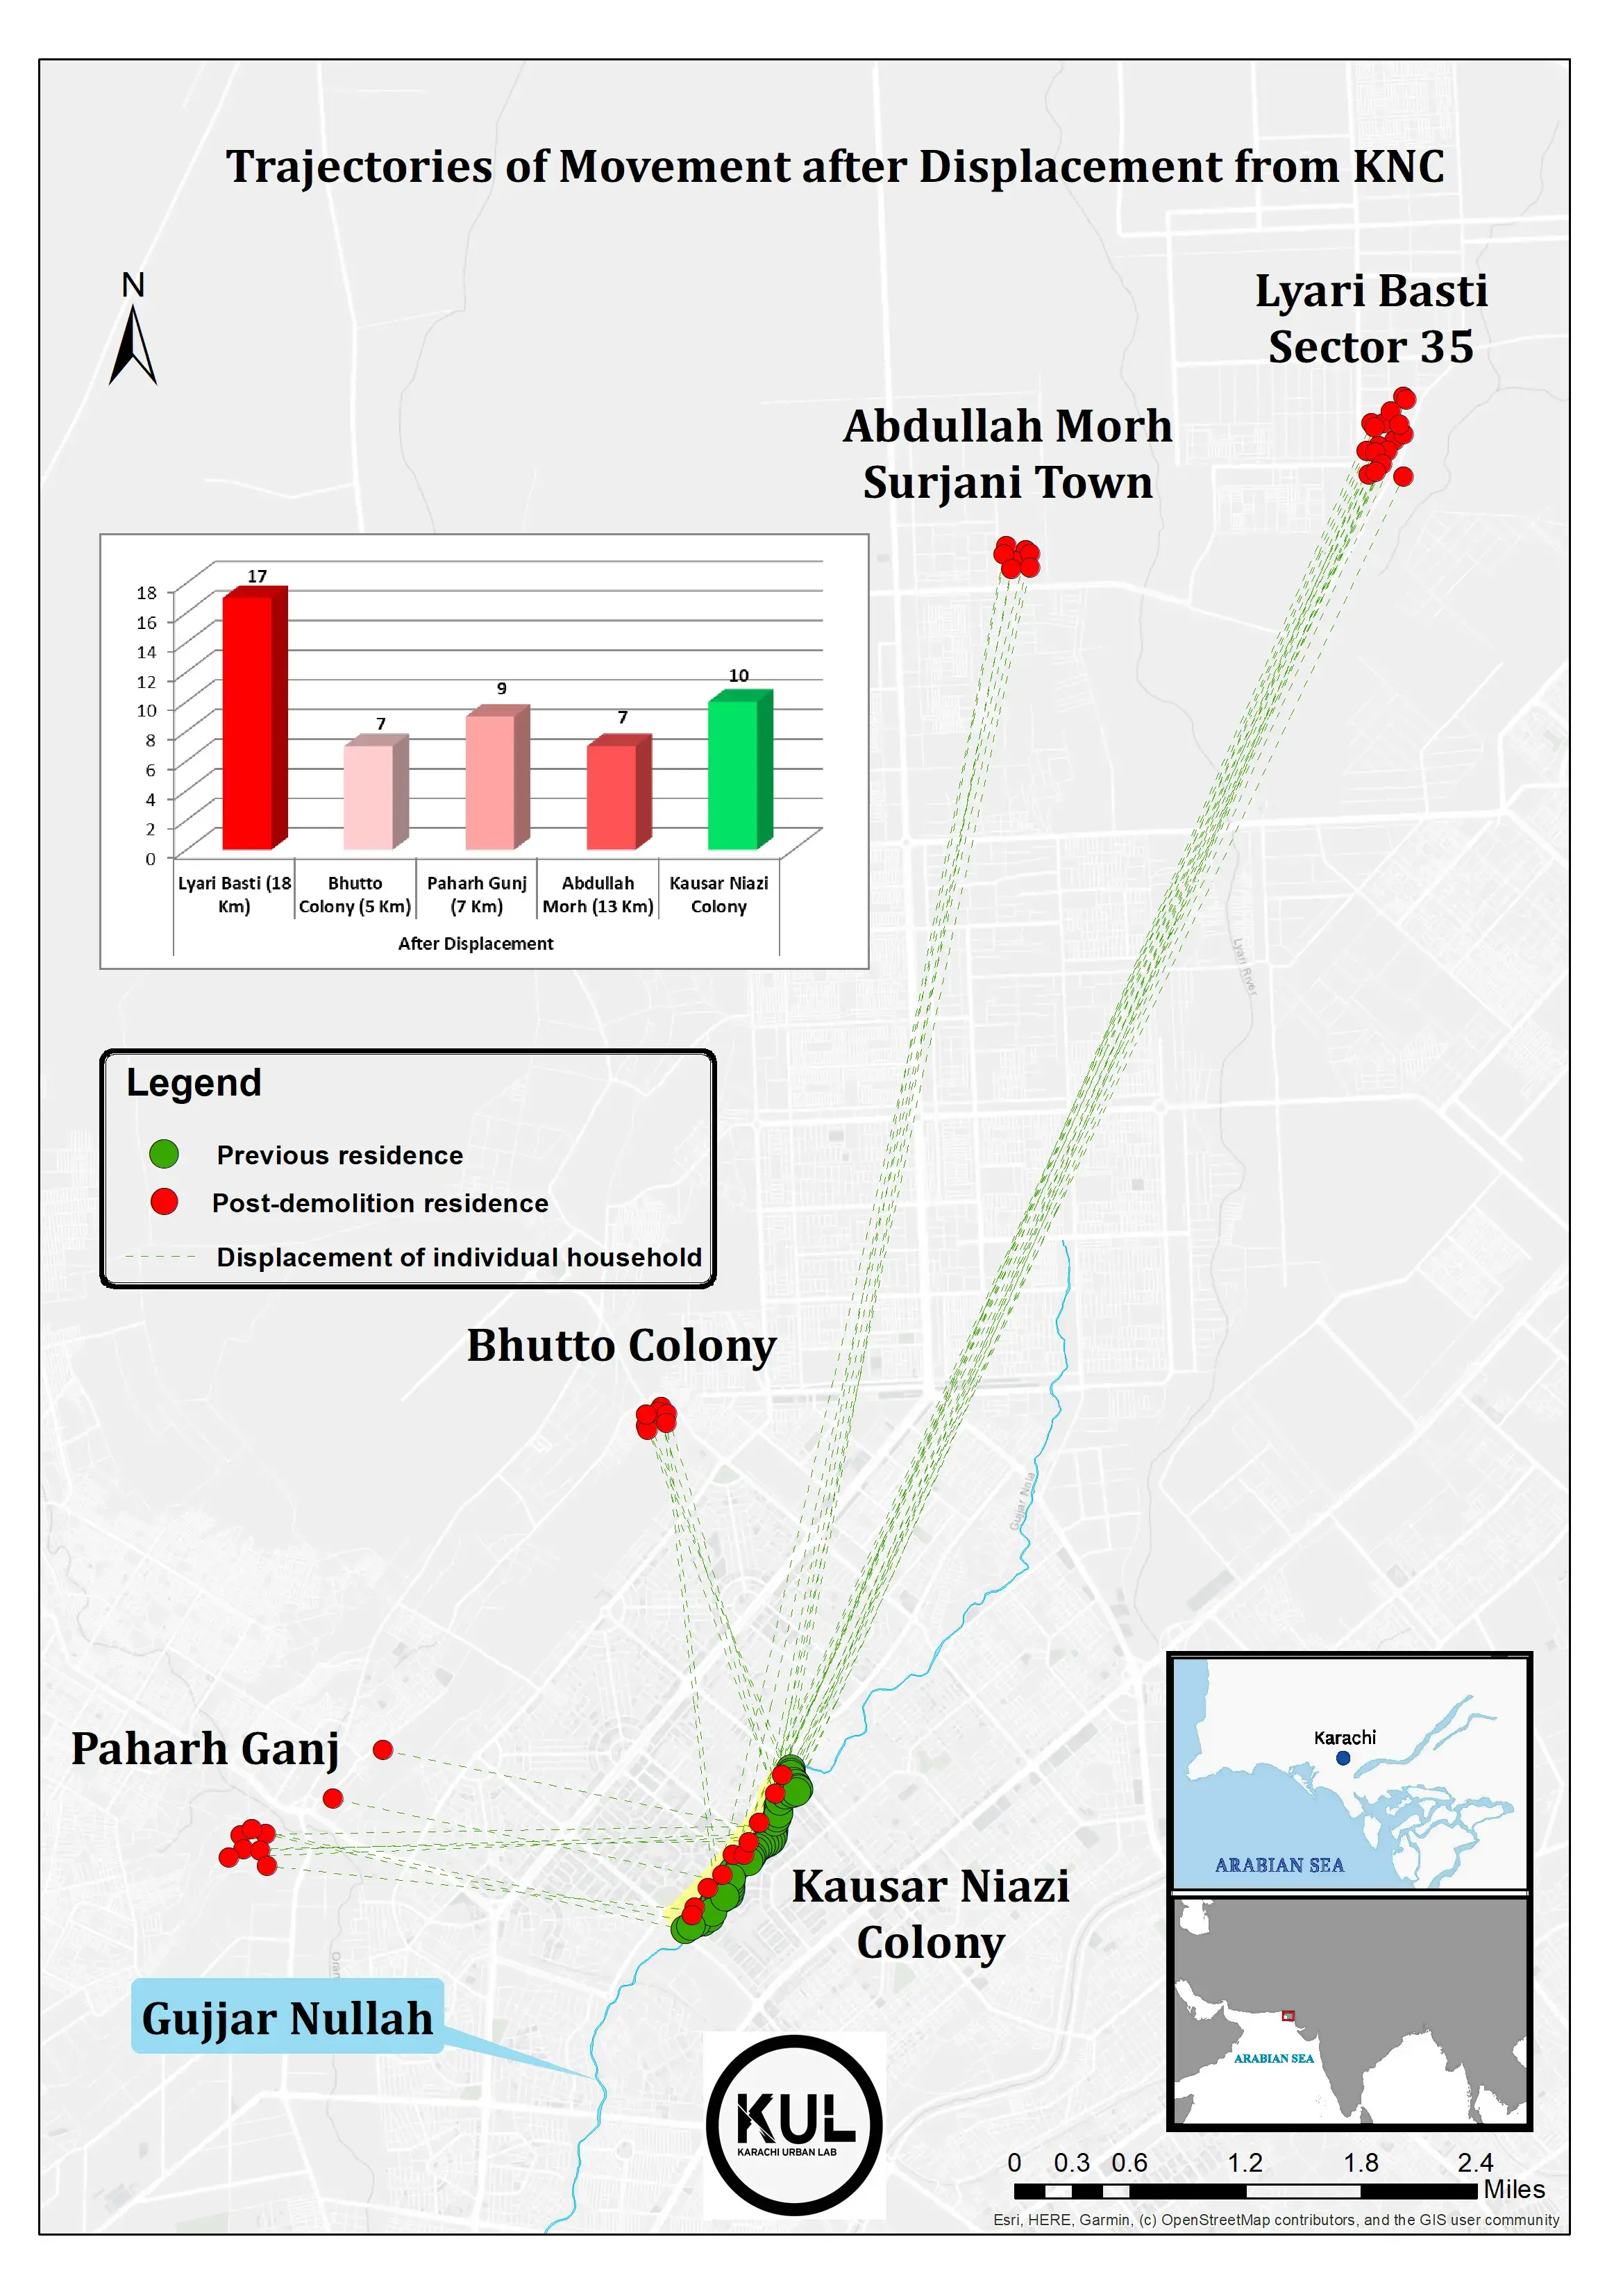 Trajectories of movement after displacement from Kausar Niazi Colony, Pakistan